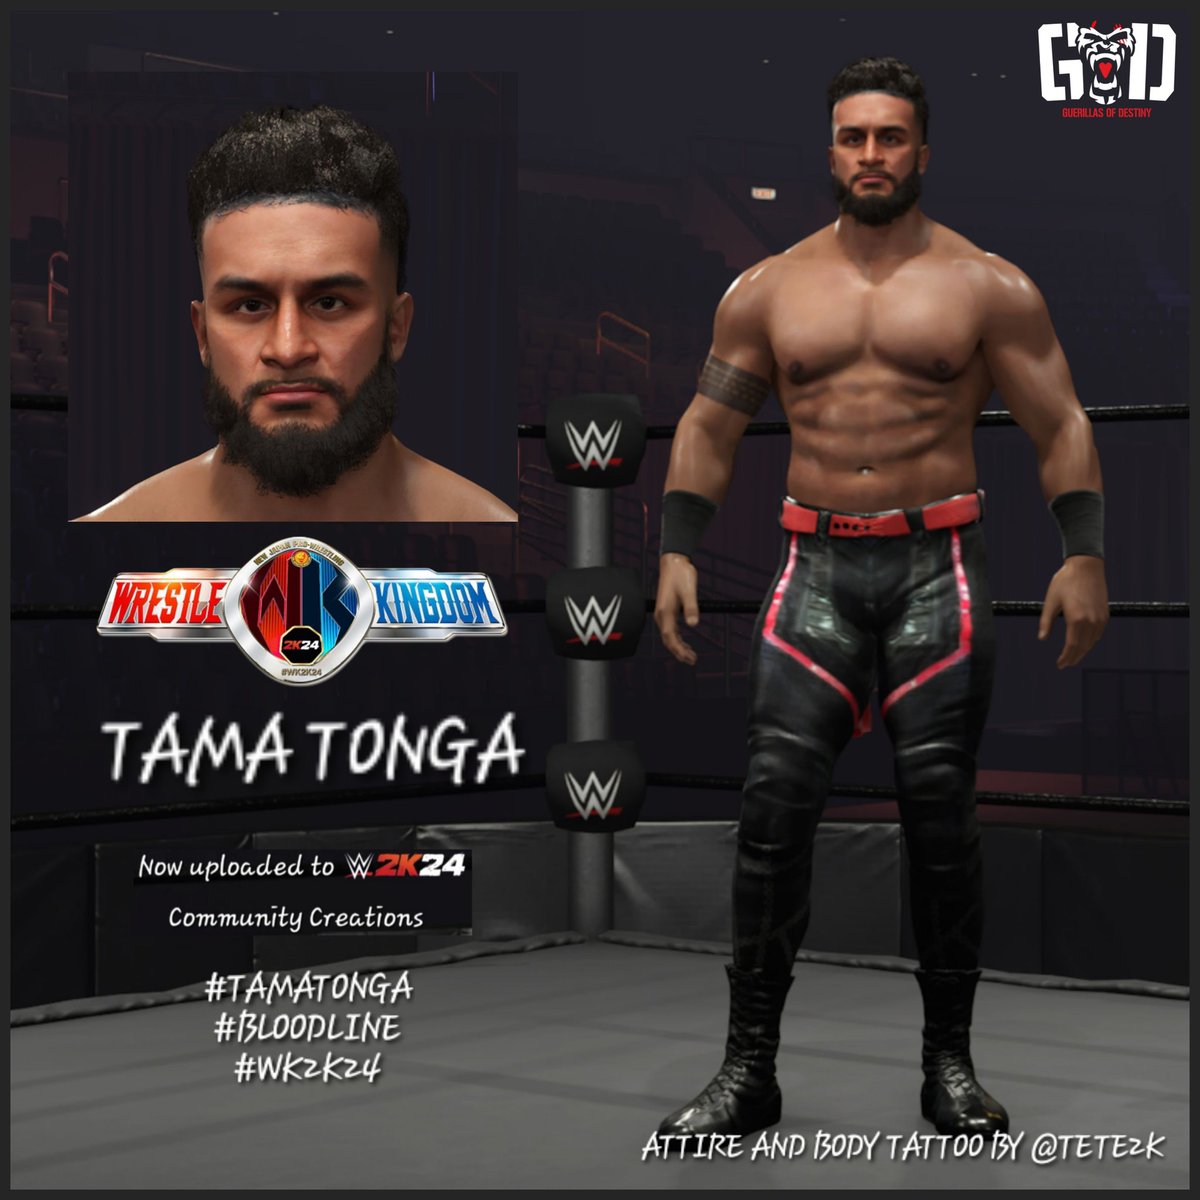 'Ain't nobody realer than Guerrilla'

The newest additions to my Wrestle Kingdom 2K24 project, members of the Bloodline, TAMA TONGA & TANGA LOA, are now available on #WWE2K24 Community Creations.

Discover them with tags:
#bloodline
#WK2K24

Attires and body texture by @Tete2k